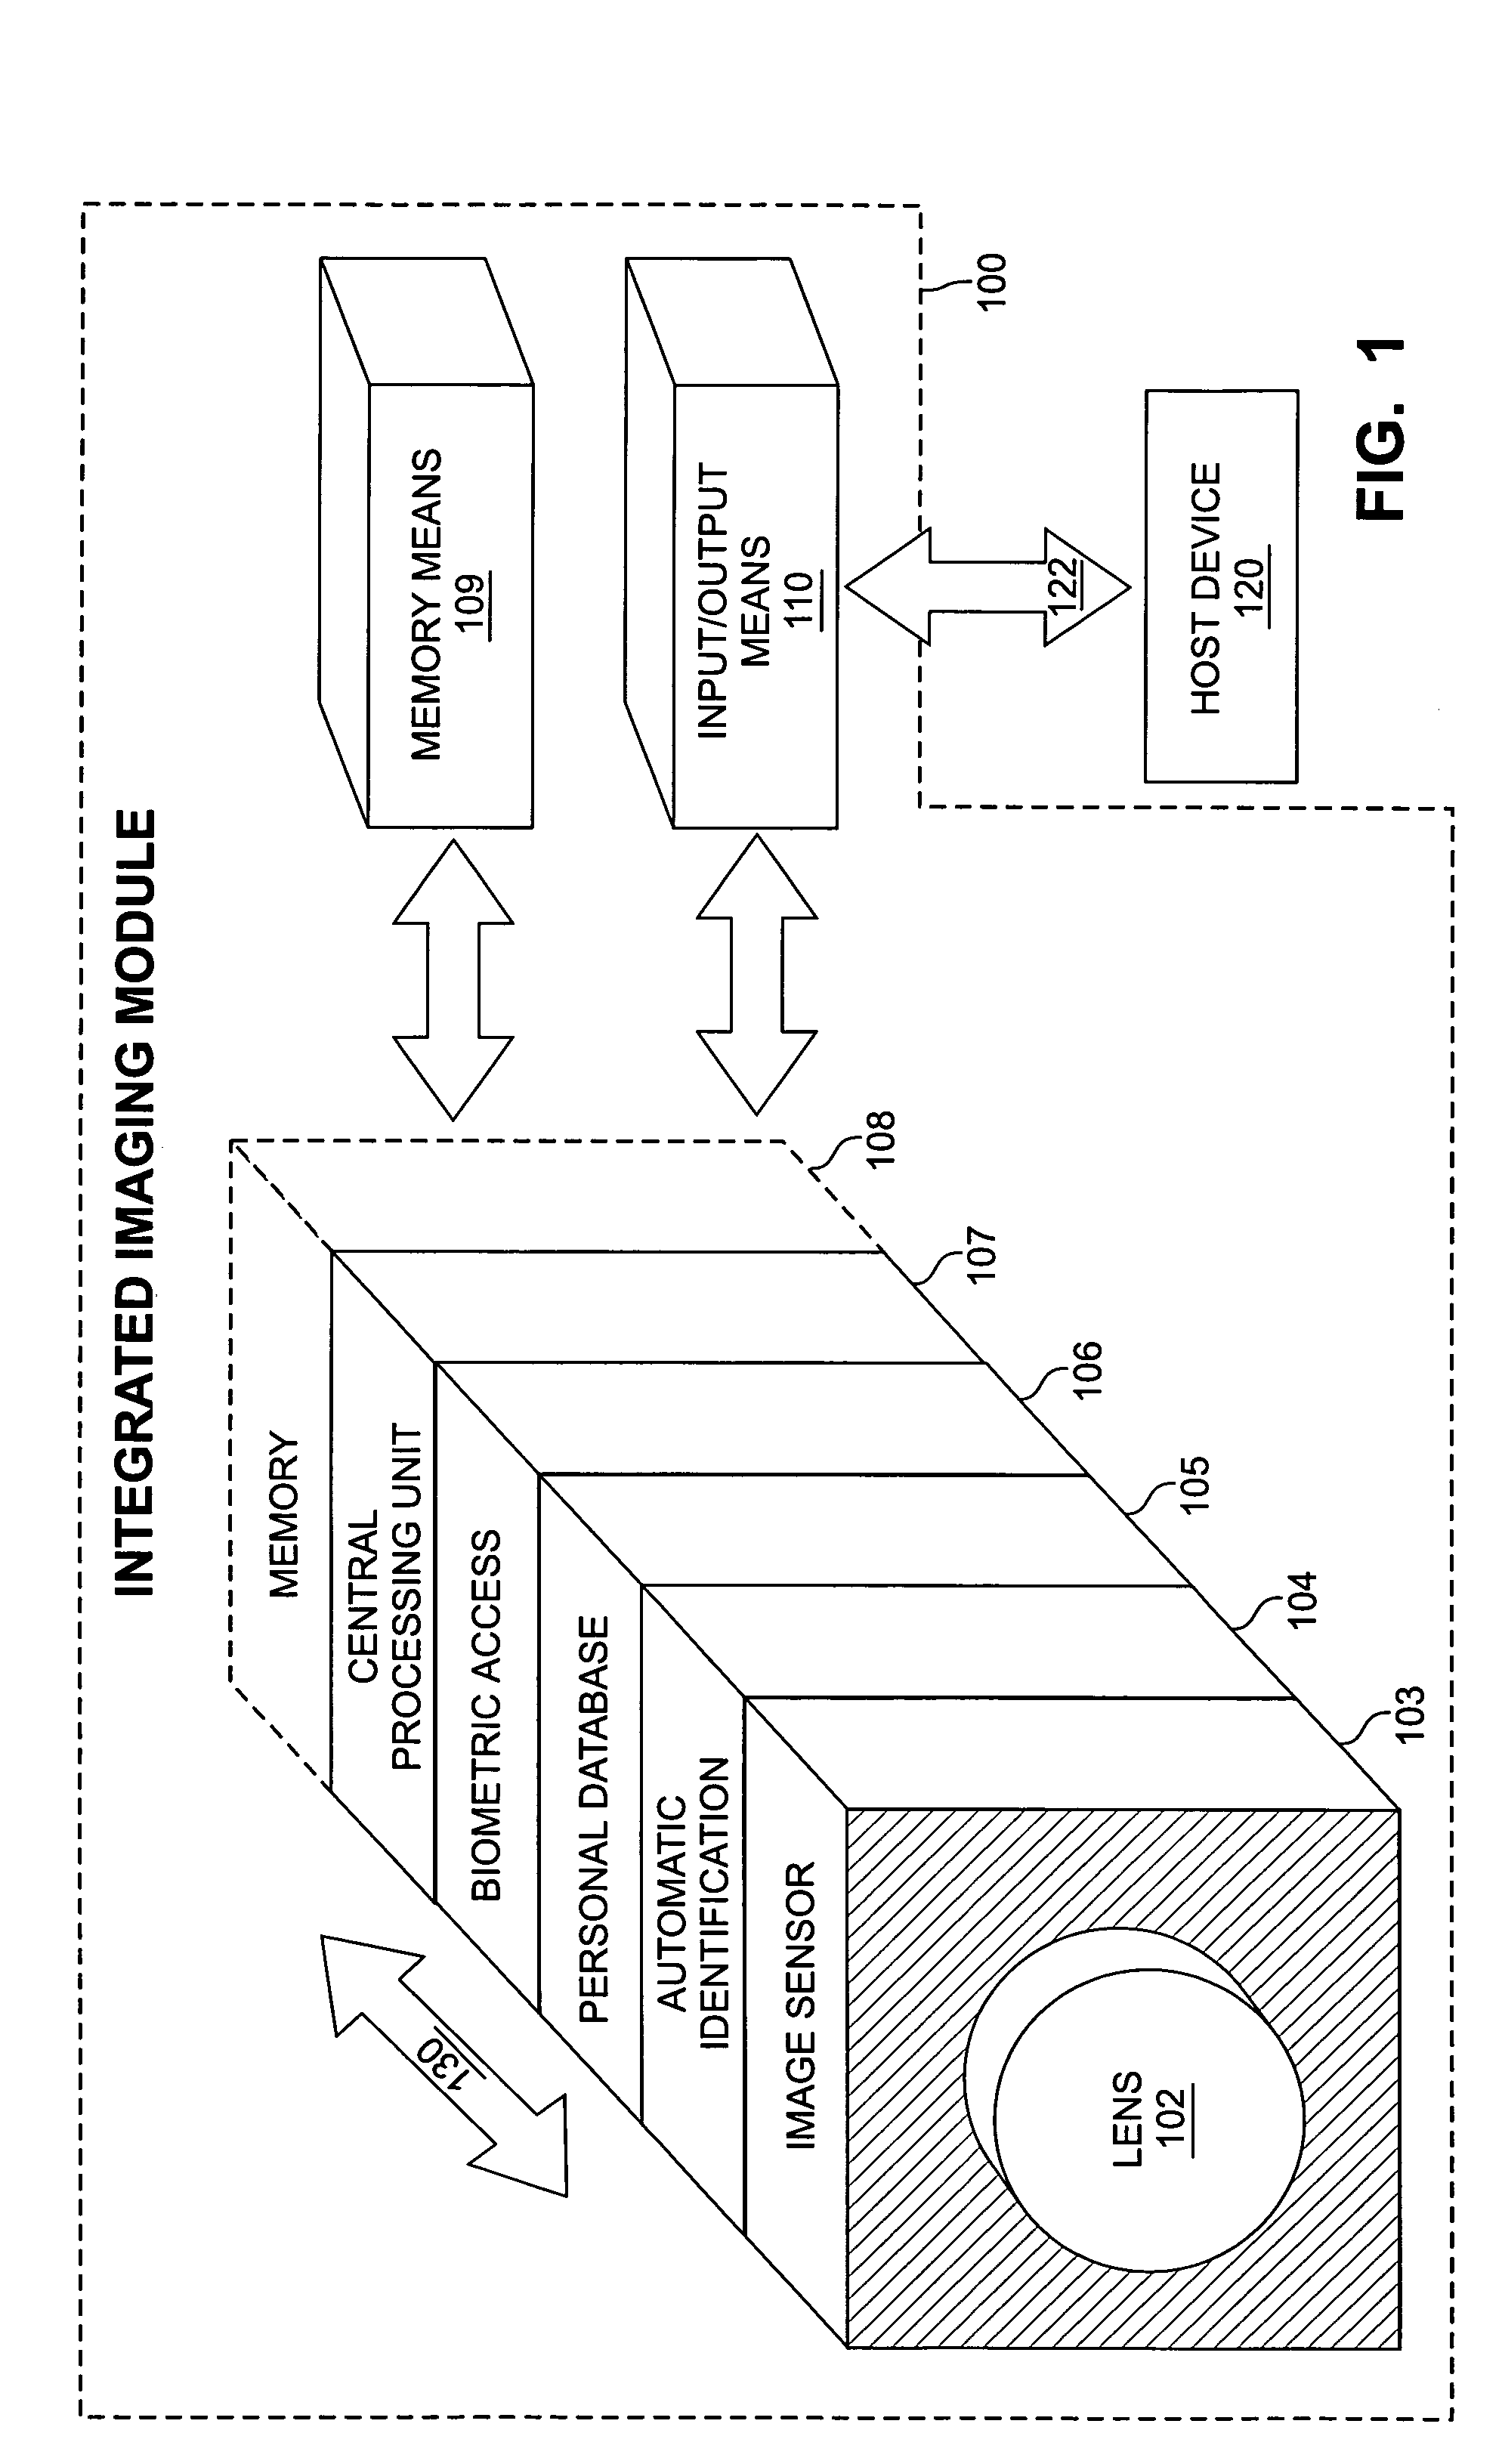 System and architecture that supports a multi-function semiconductor device between networks and portable wireless communications products